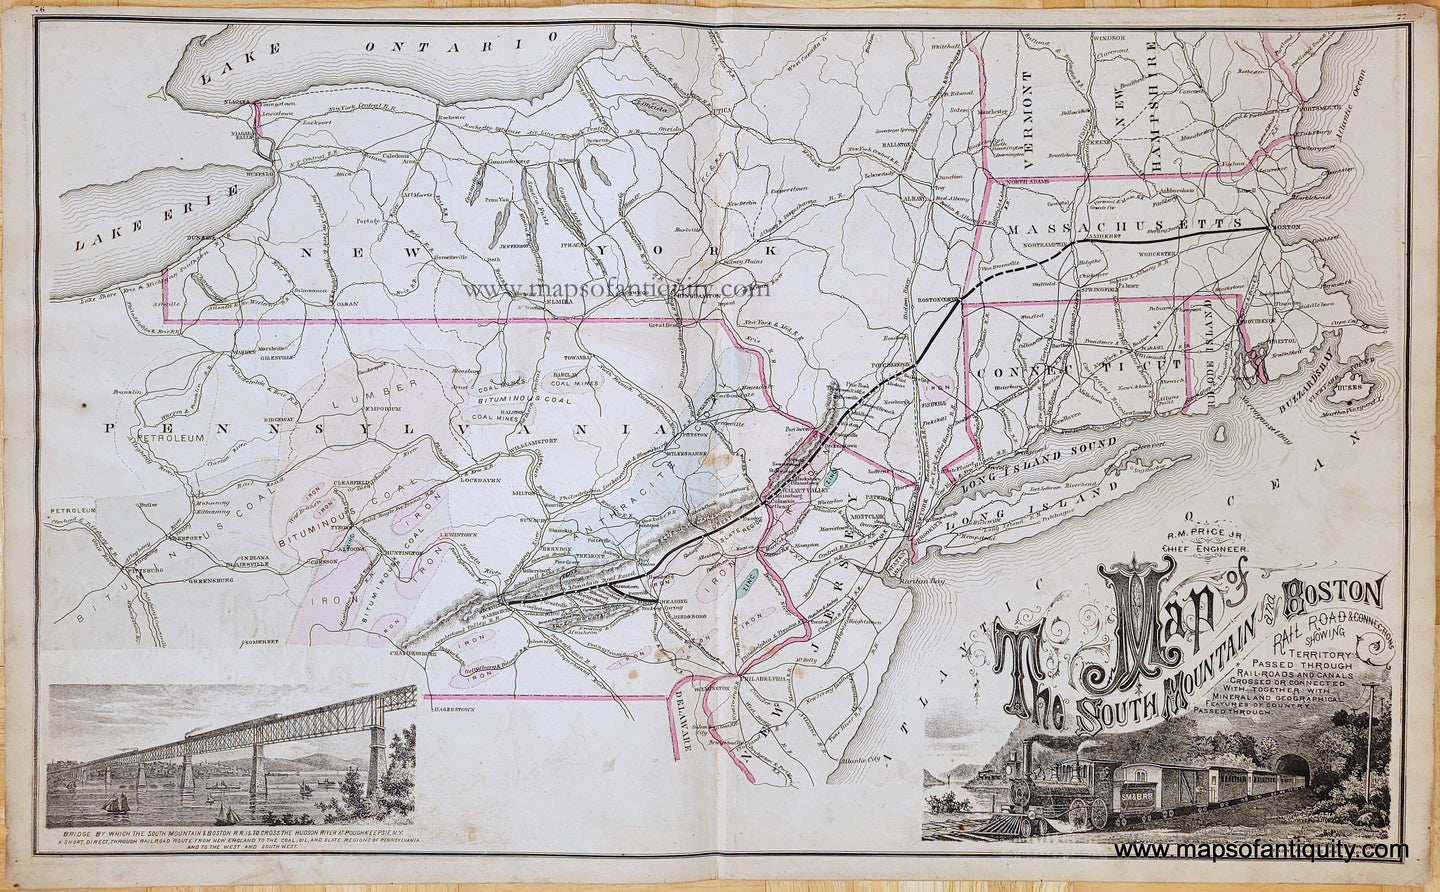 Genuine-Antique-Map-Map-of-the-South-Mountain-and-Boston-Rail-Road-Connectionsâ€¦-1876-Reading-Publishing-House-Maps-Of-Antiquity